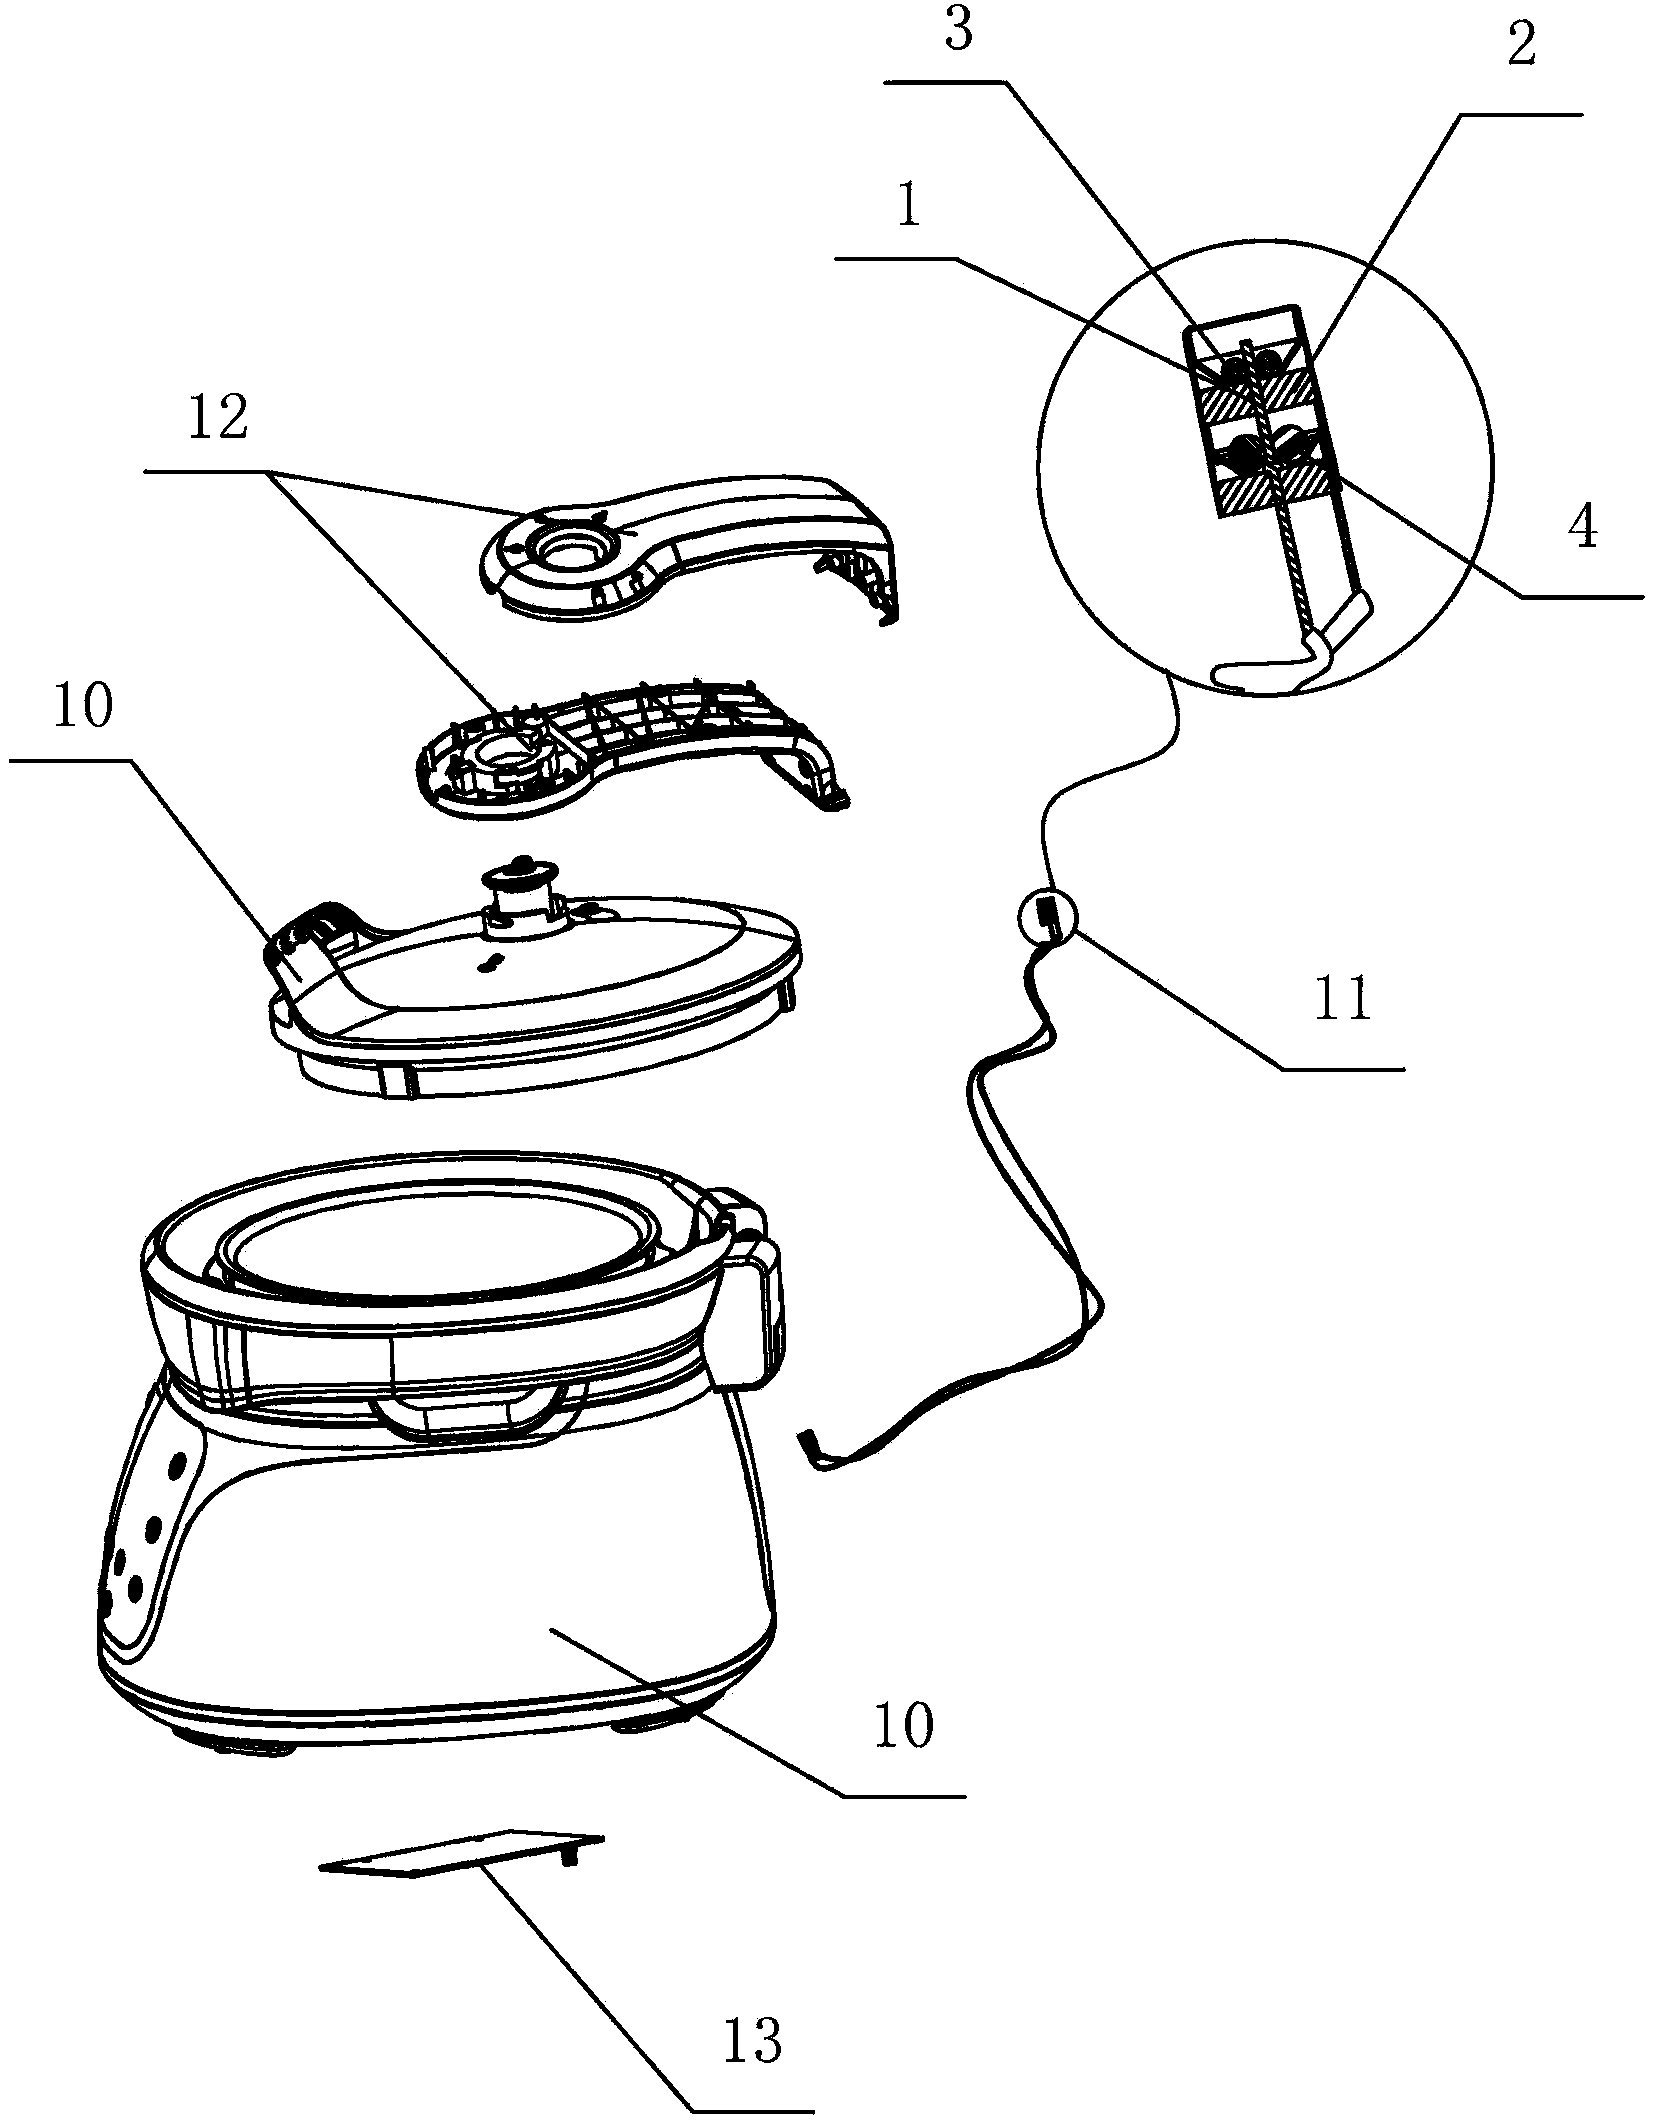 Electric pressure cooker cover opening and closing signal feedback device